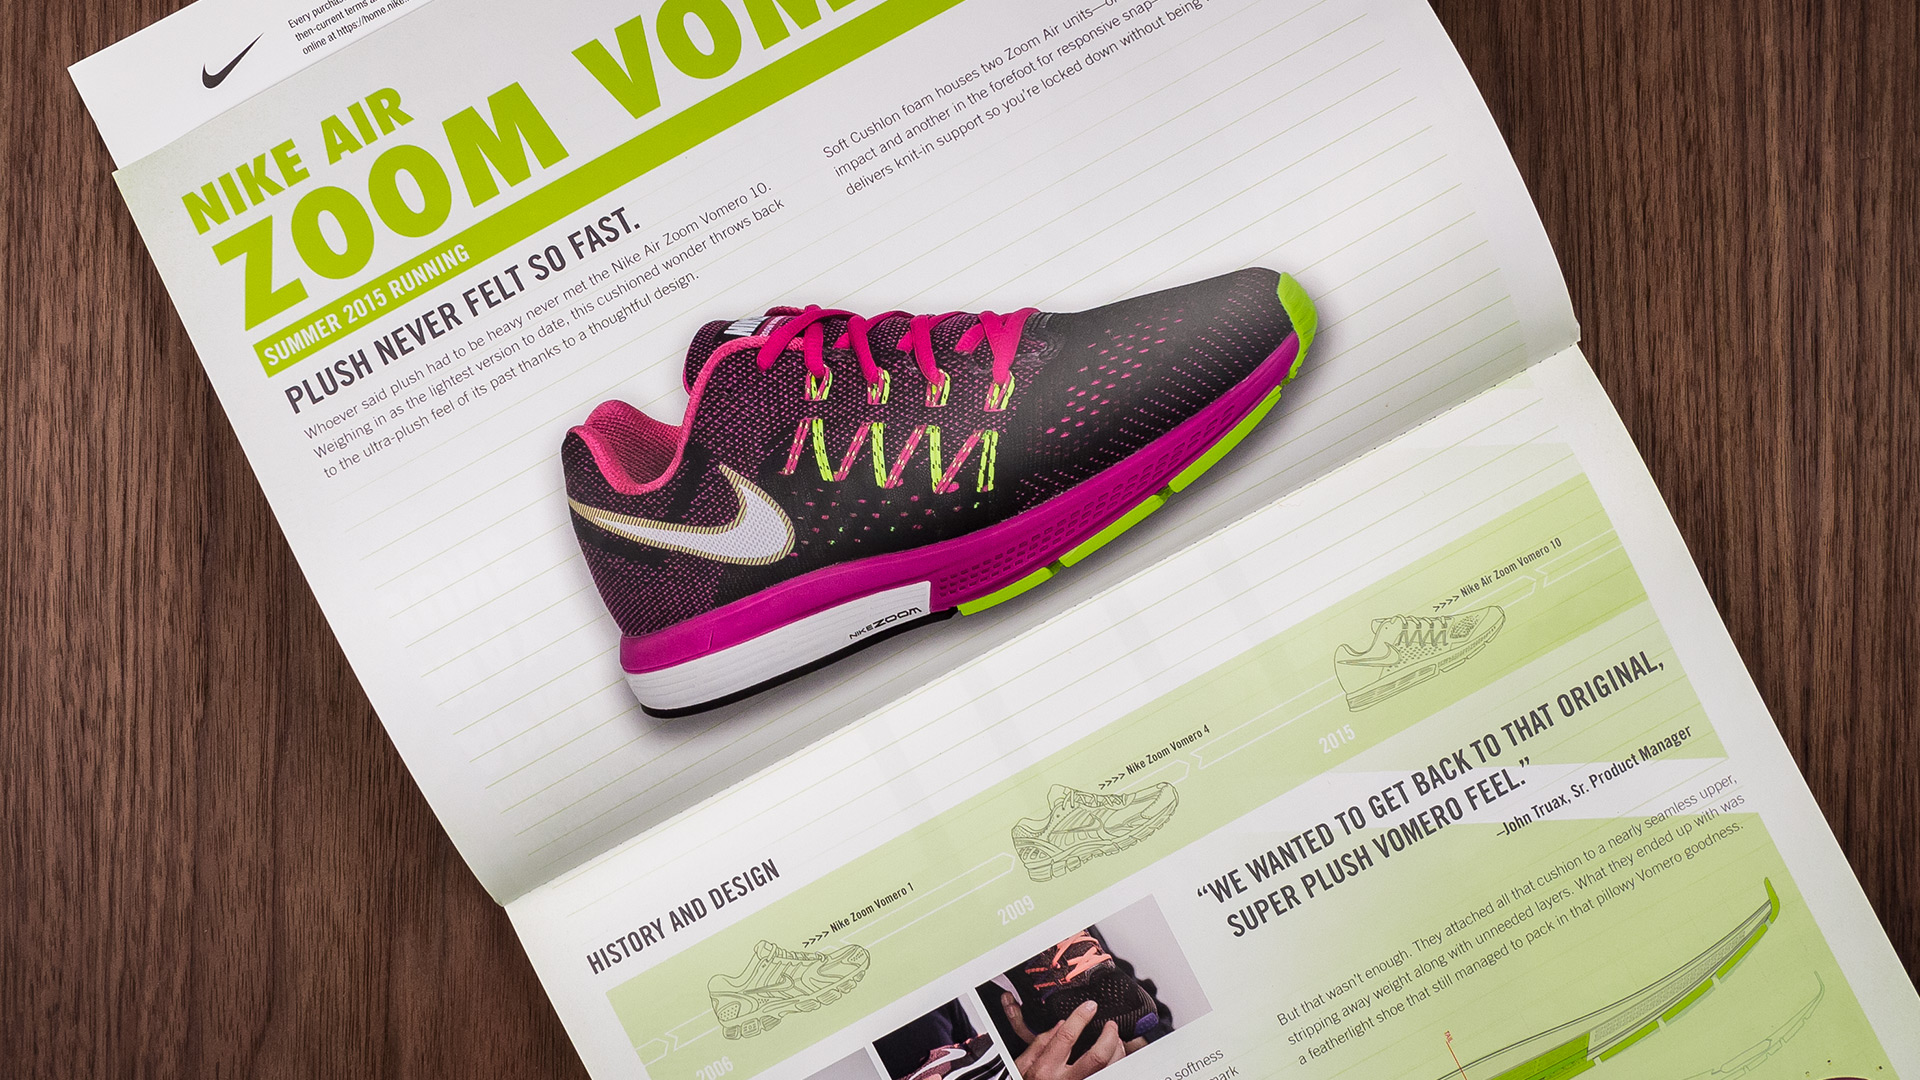 Nike Running Specialty Product Catalog design created by Incubate Design